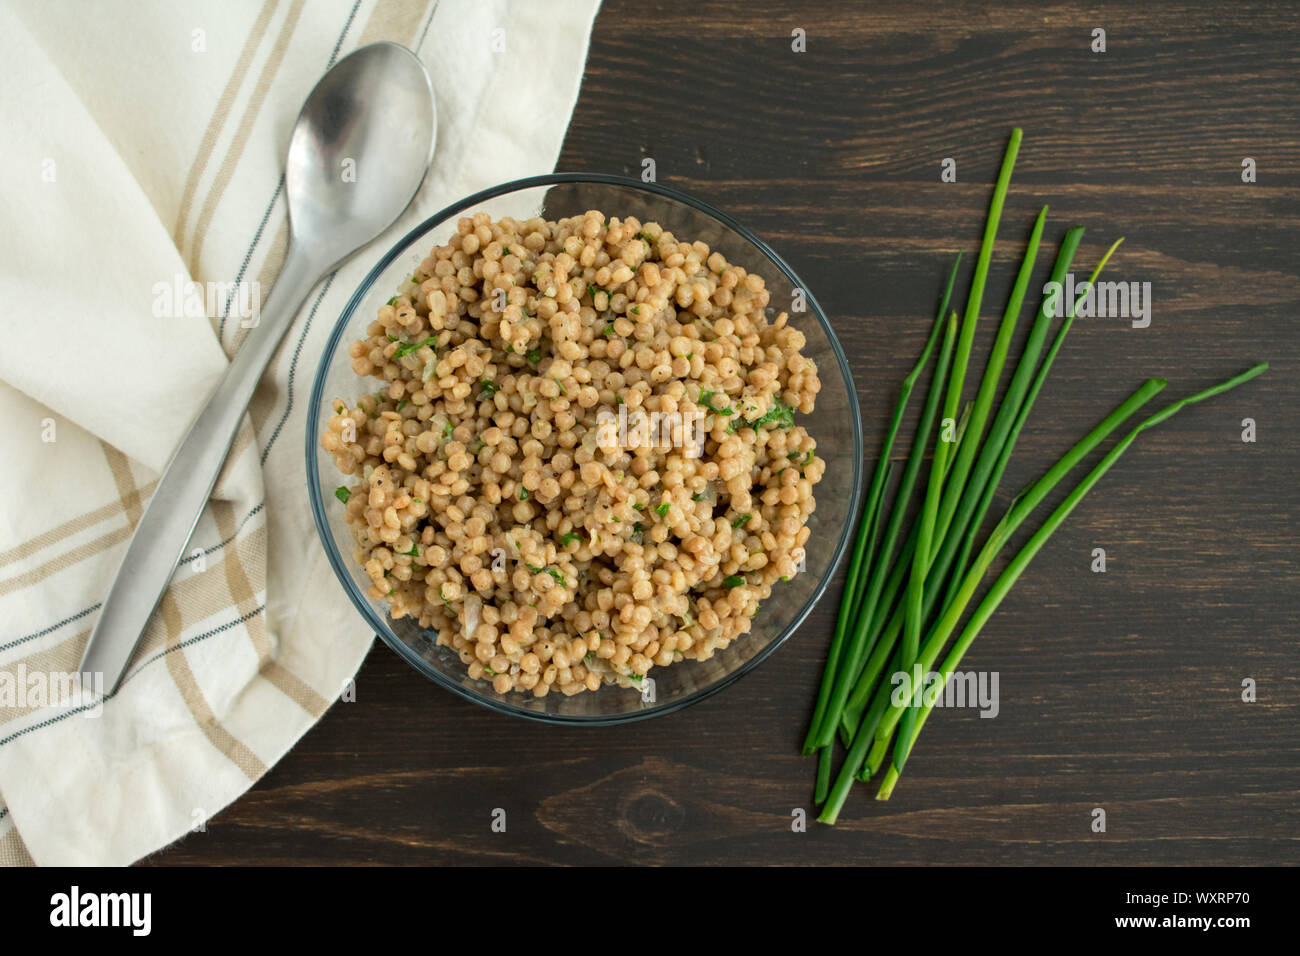 Herbed Couscous Pilaf with Chives: A bowl of whole wheat pearl couscous with fresh chives, a spoon, and a napkin. Stock Photo